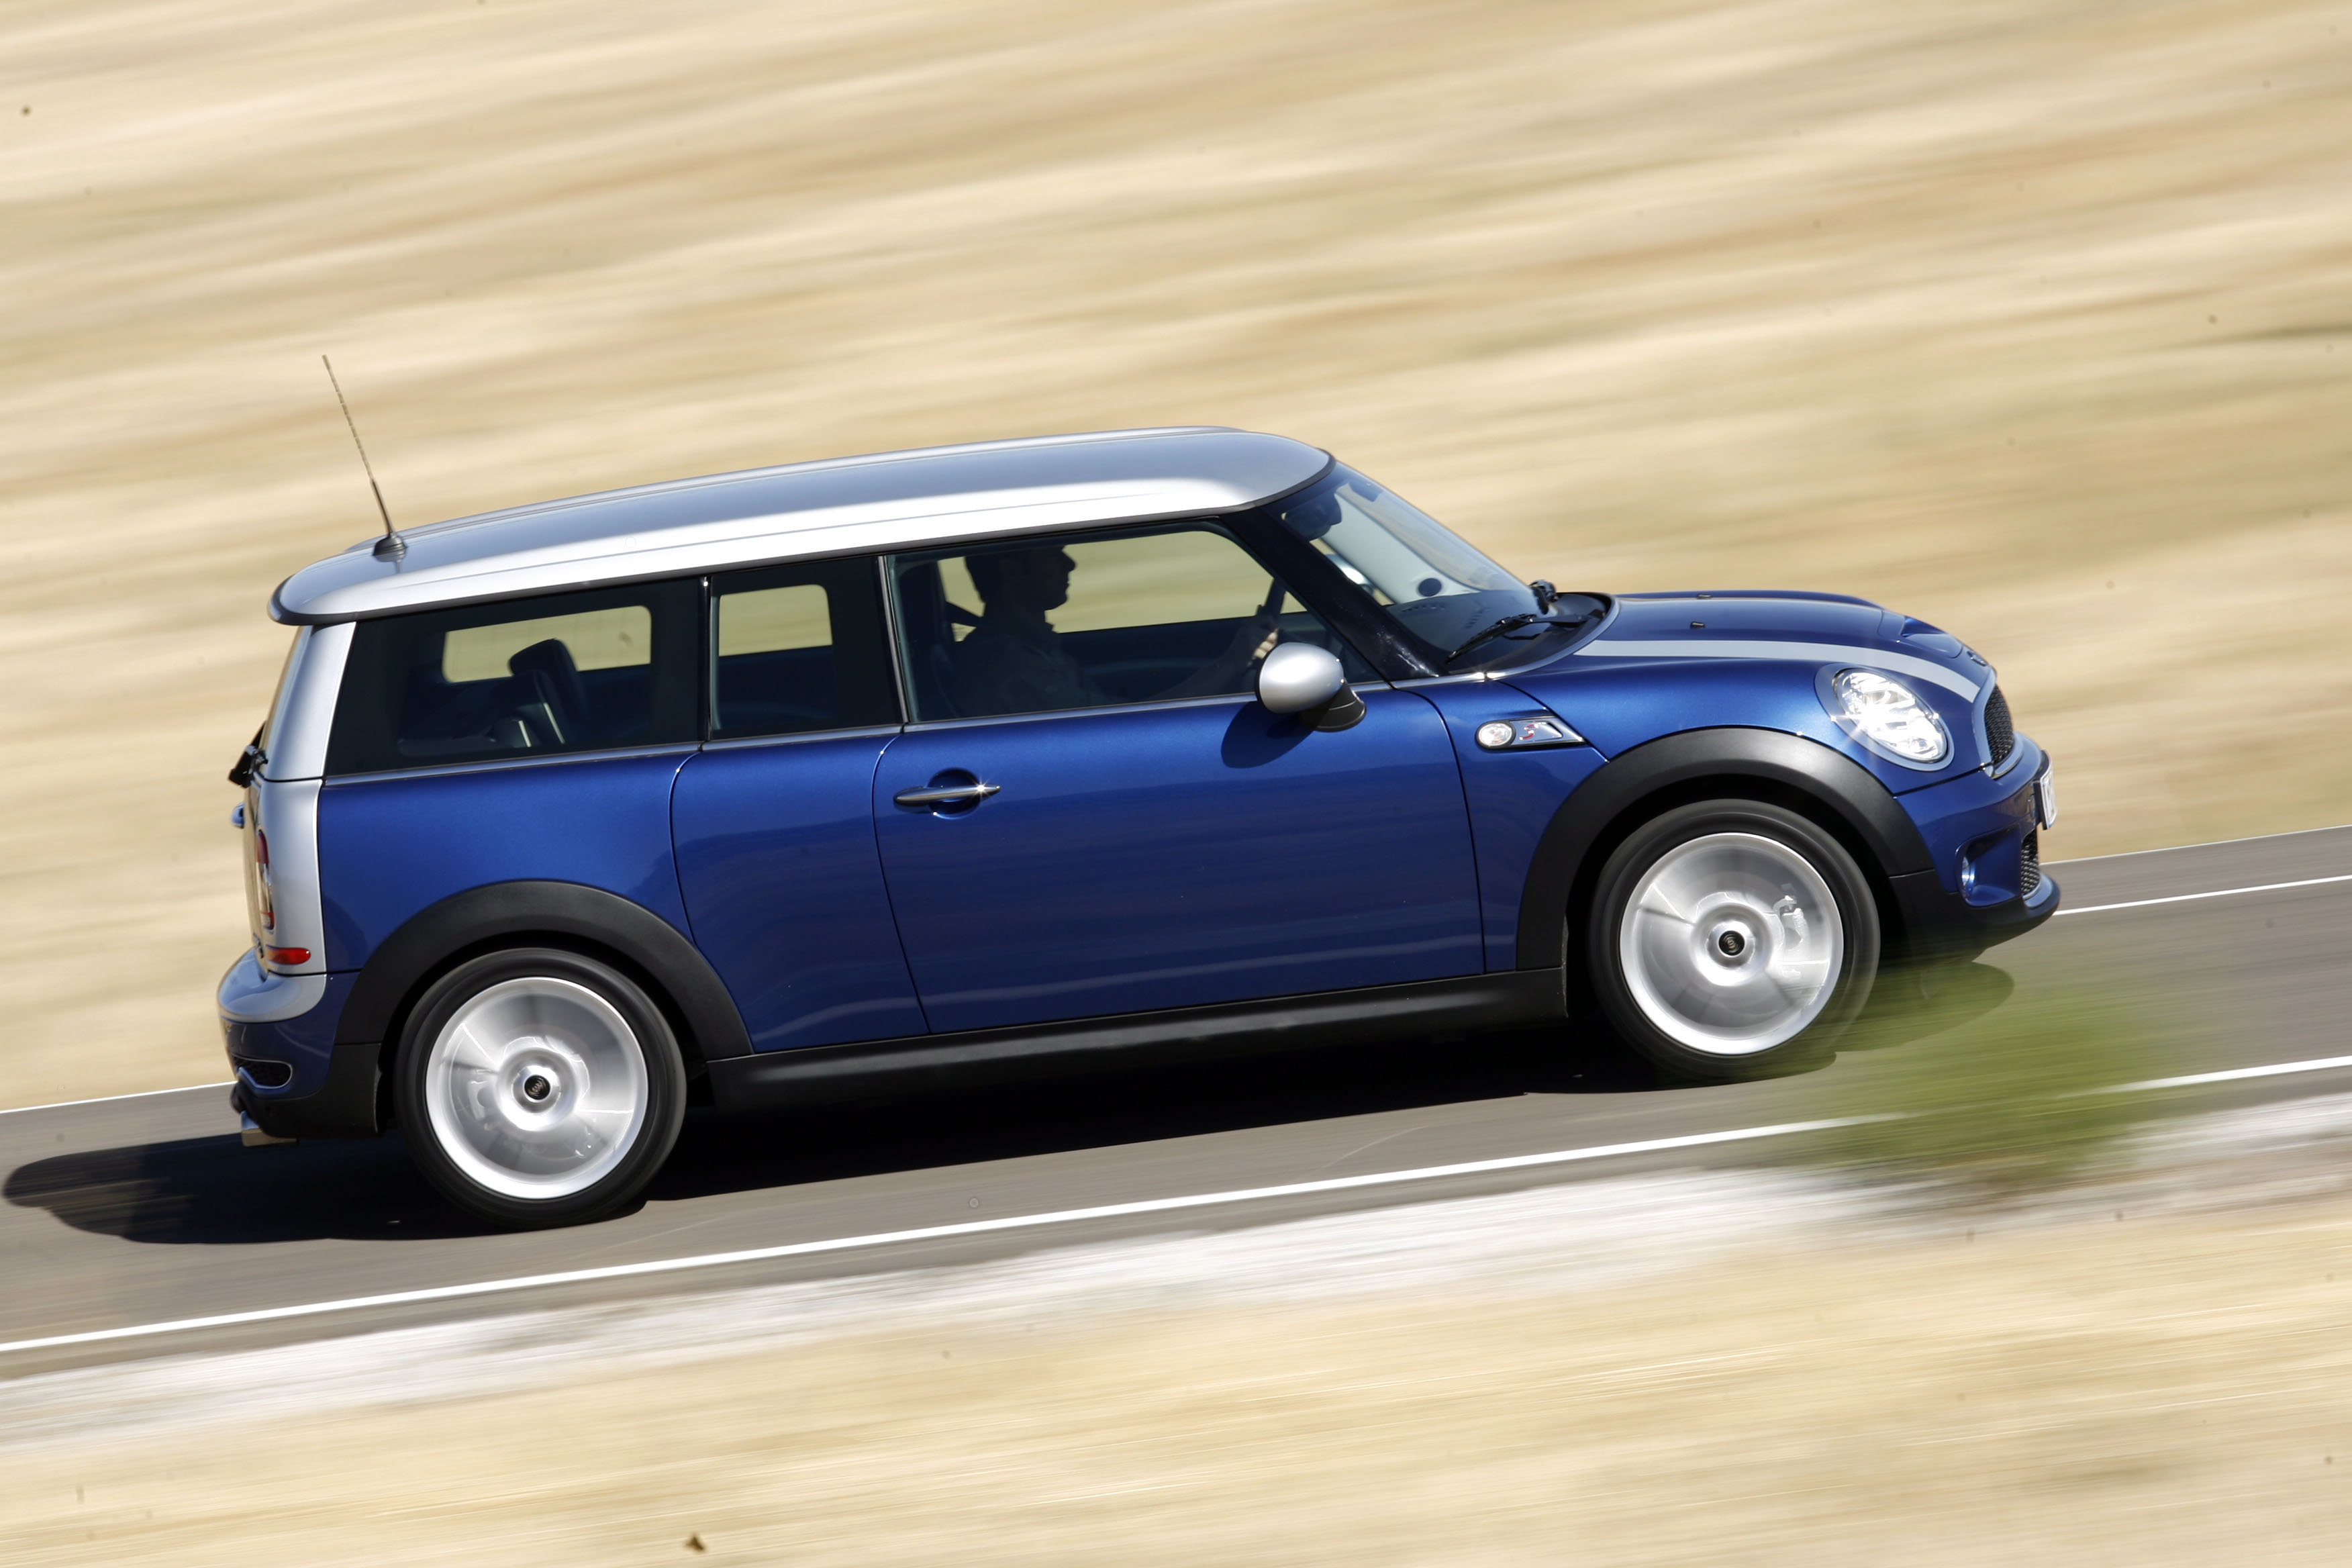 Is a Used 2007-2013 R56 Mini Cooper Reliable?